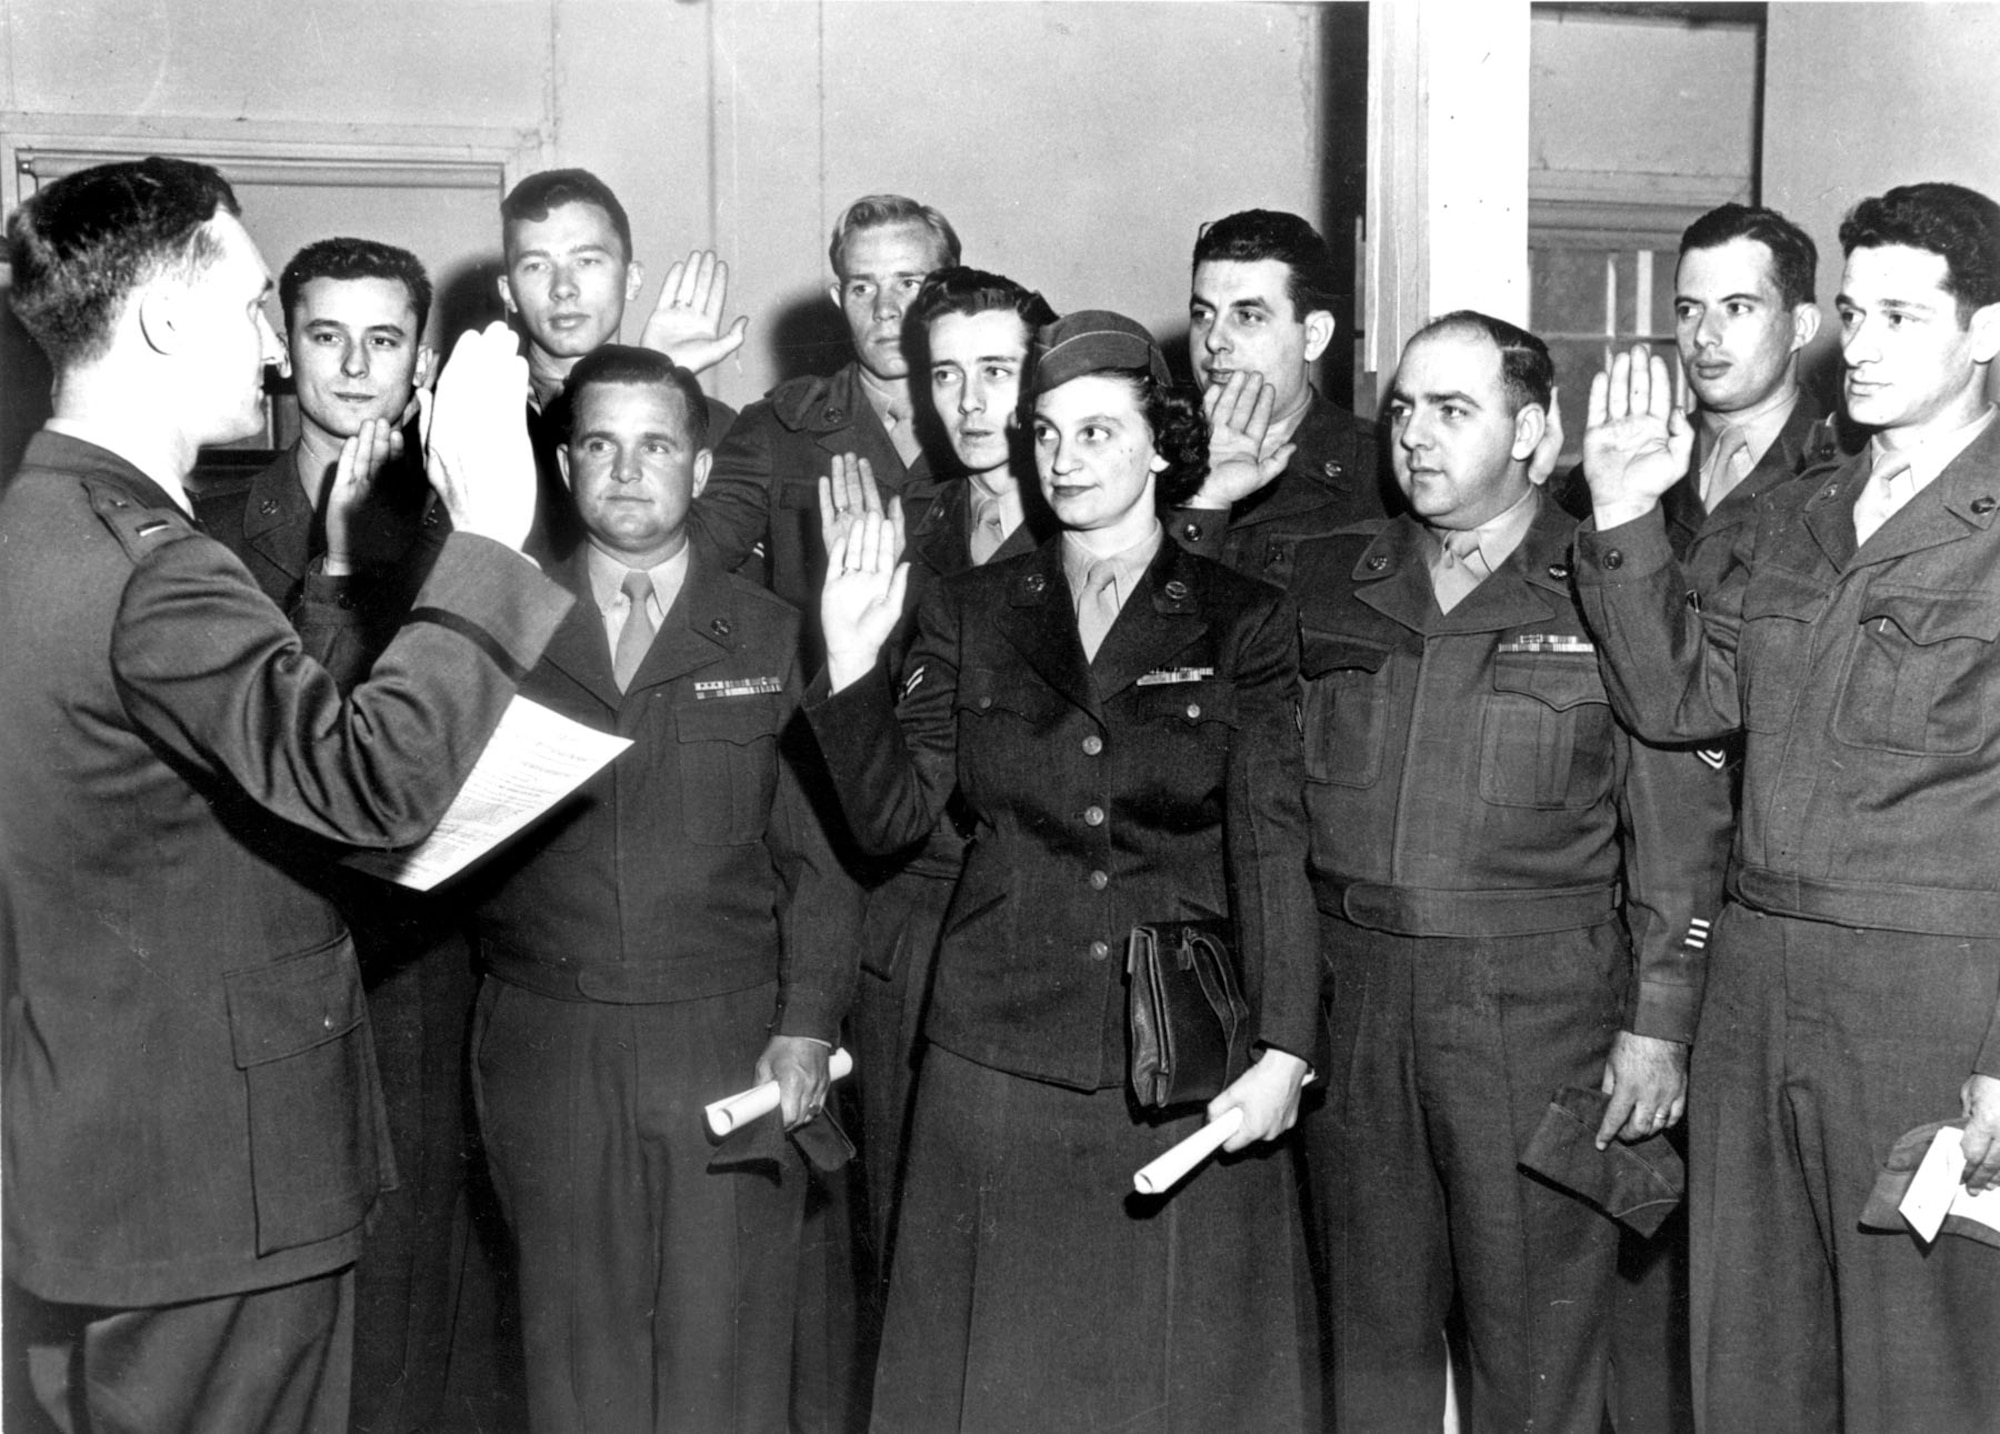 Air Force Reserve members re-affirm their oaths of service at Mitchel Air Force Base, N.Y., 1951. (U.S. Air Force photo)